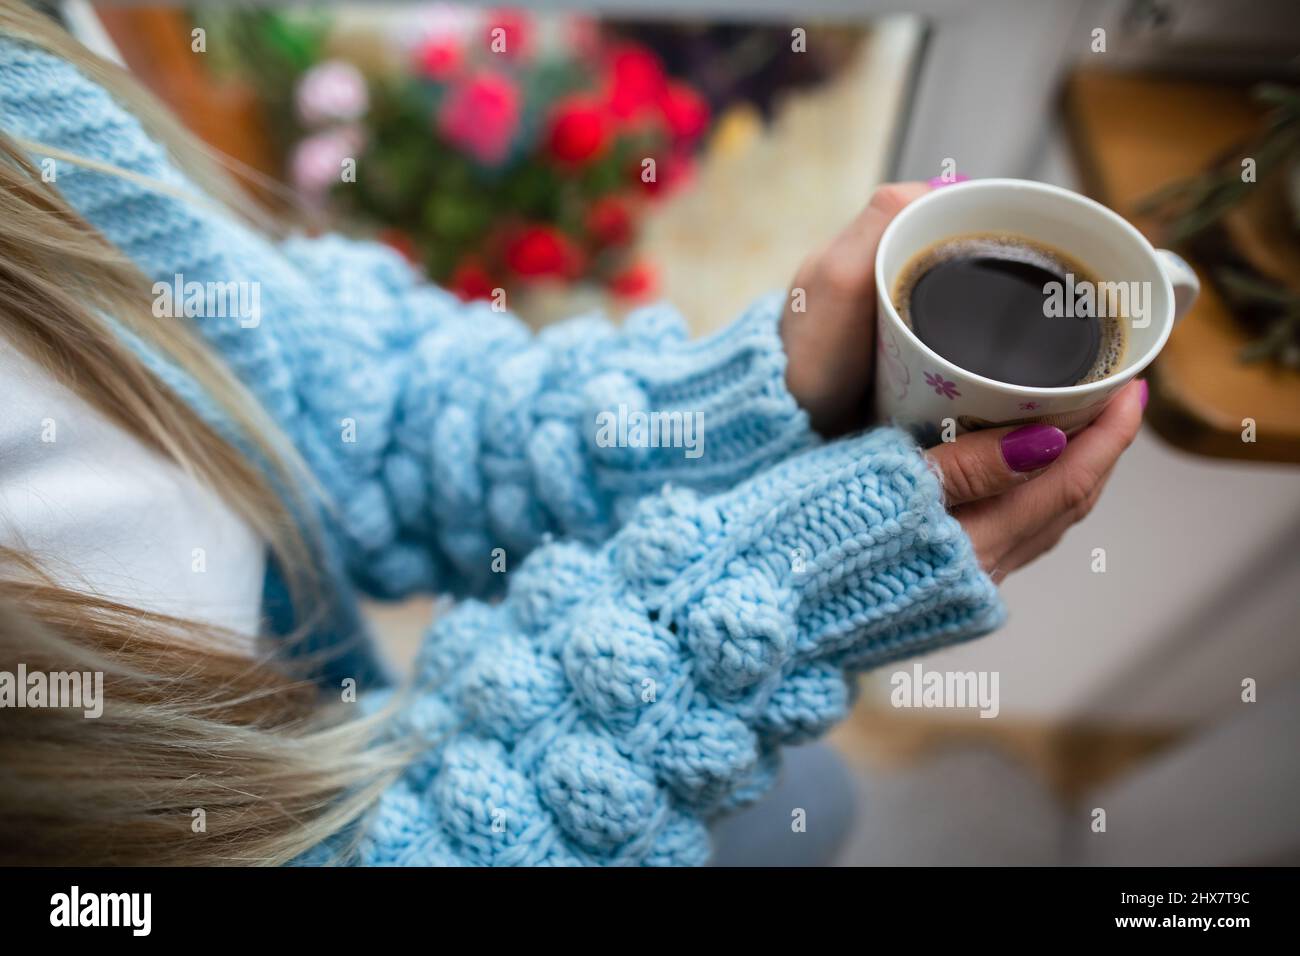 A woman warms her frozen hands against a mug of hot coffee. Stock Photo